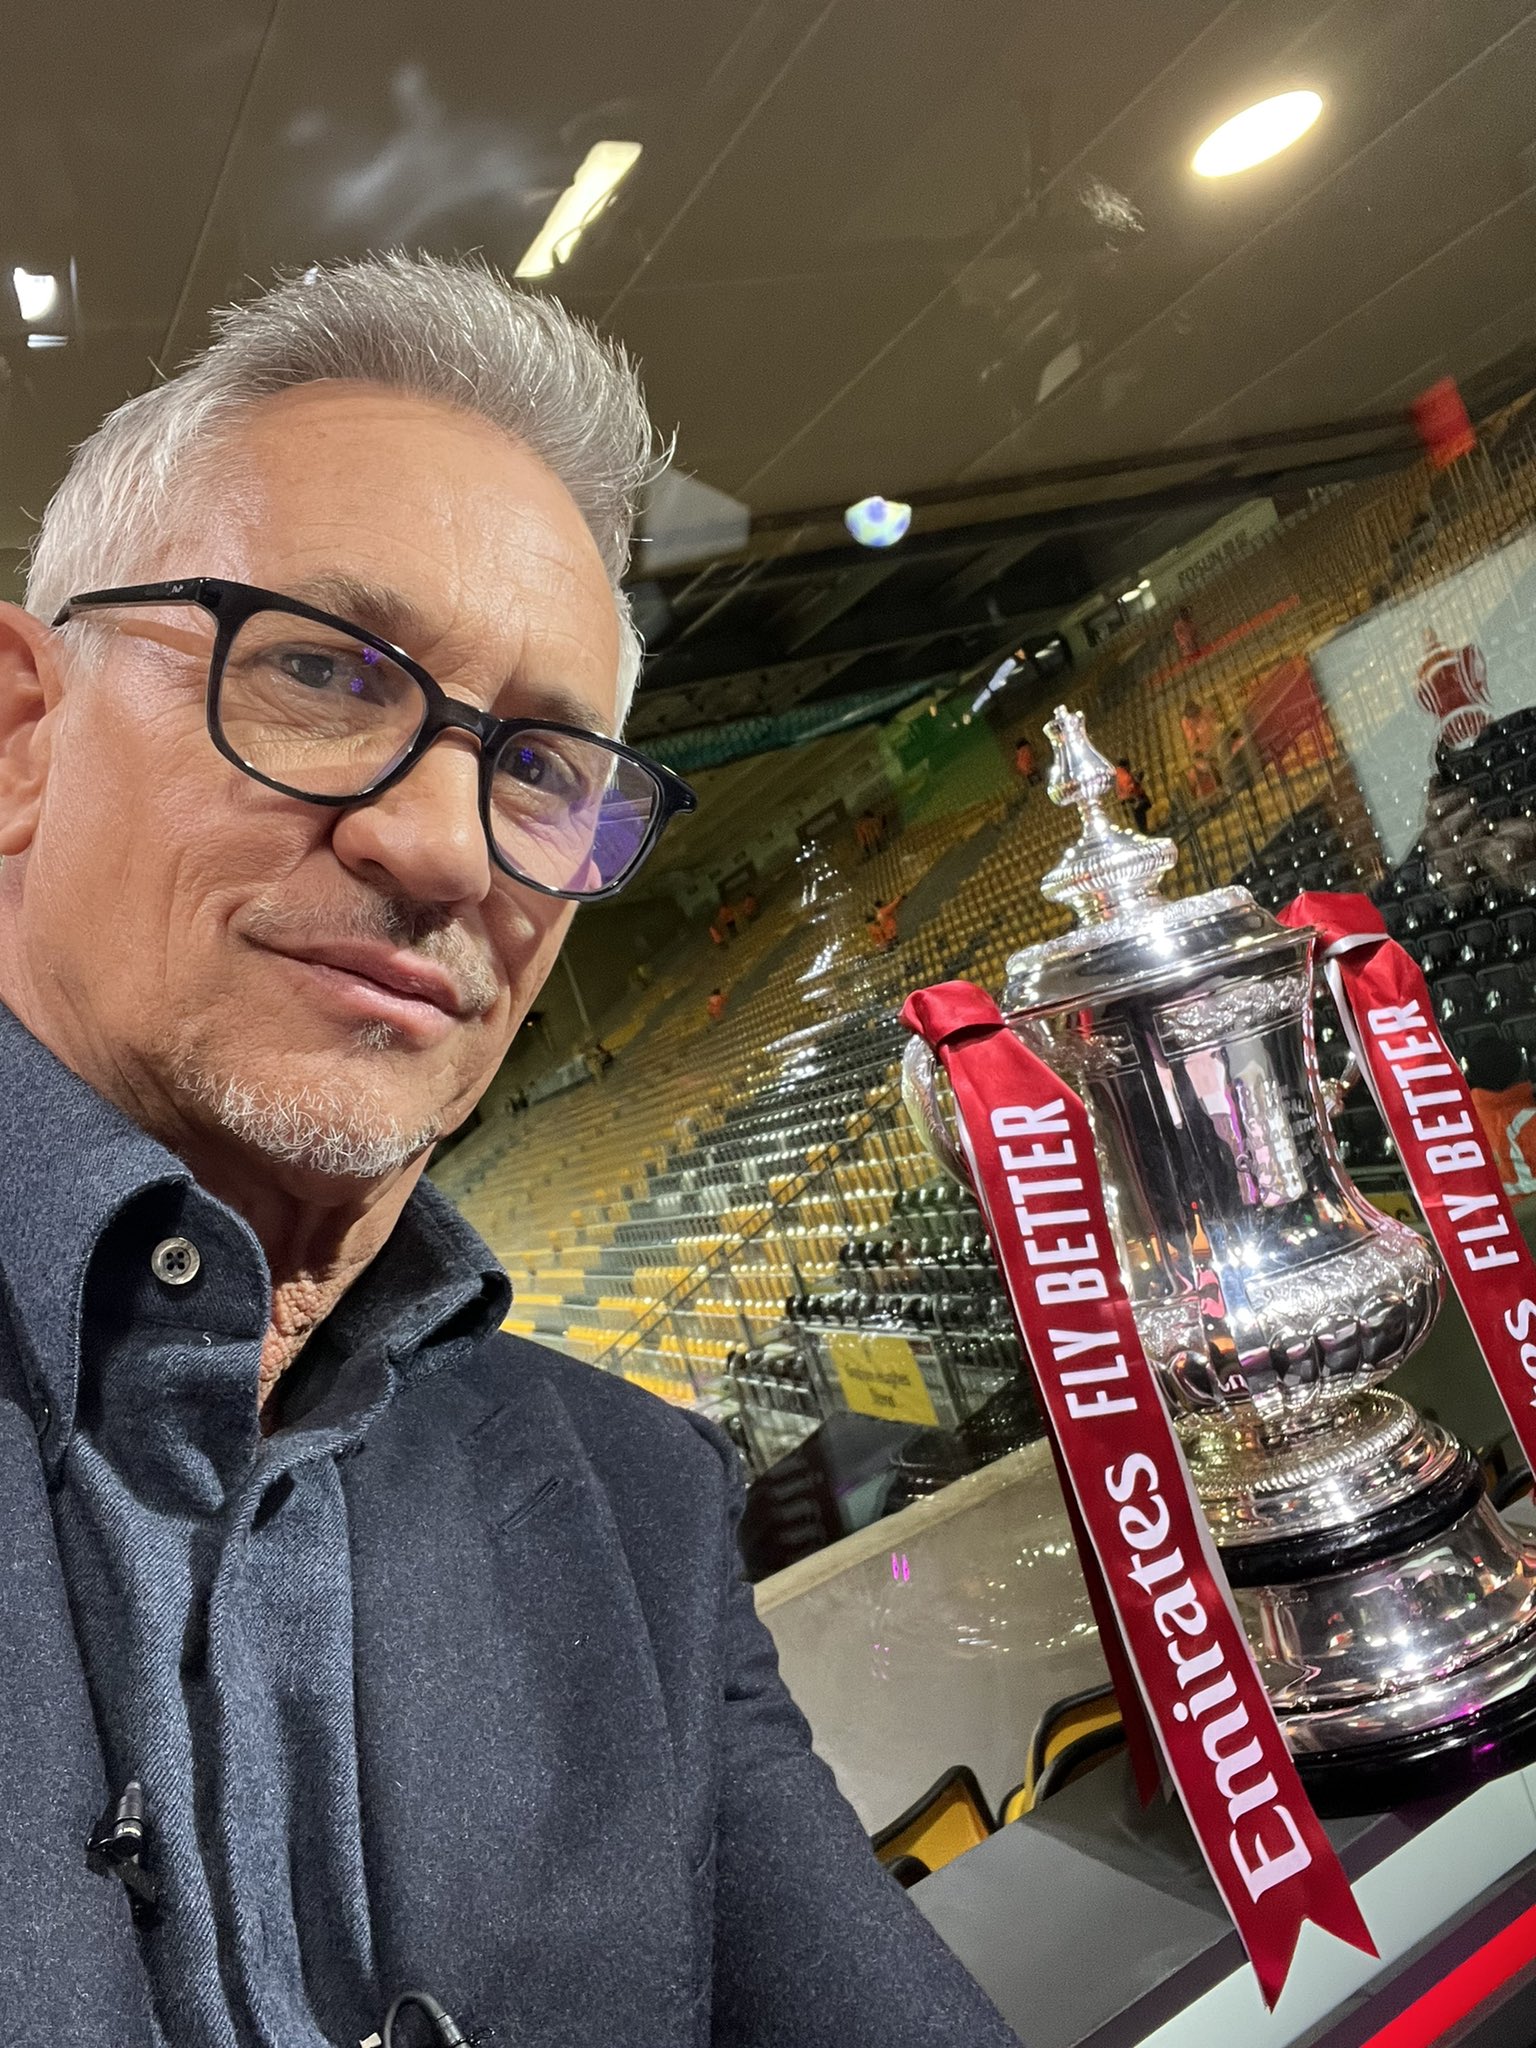 Gary Lineker reveals truth after BBC’s FA Liverpool vs Wolves FA Cup coverage interrupted by porn noise